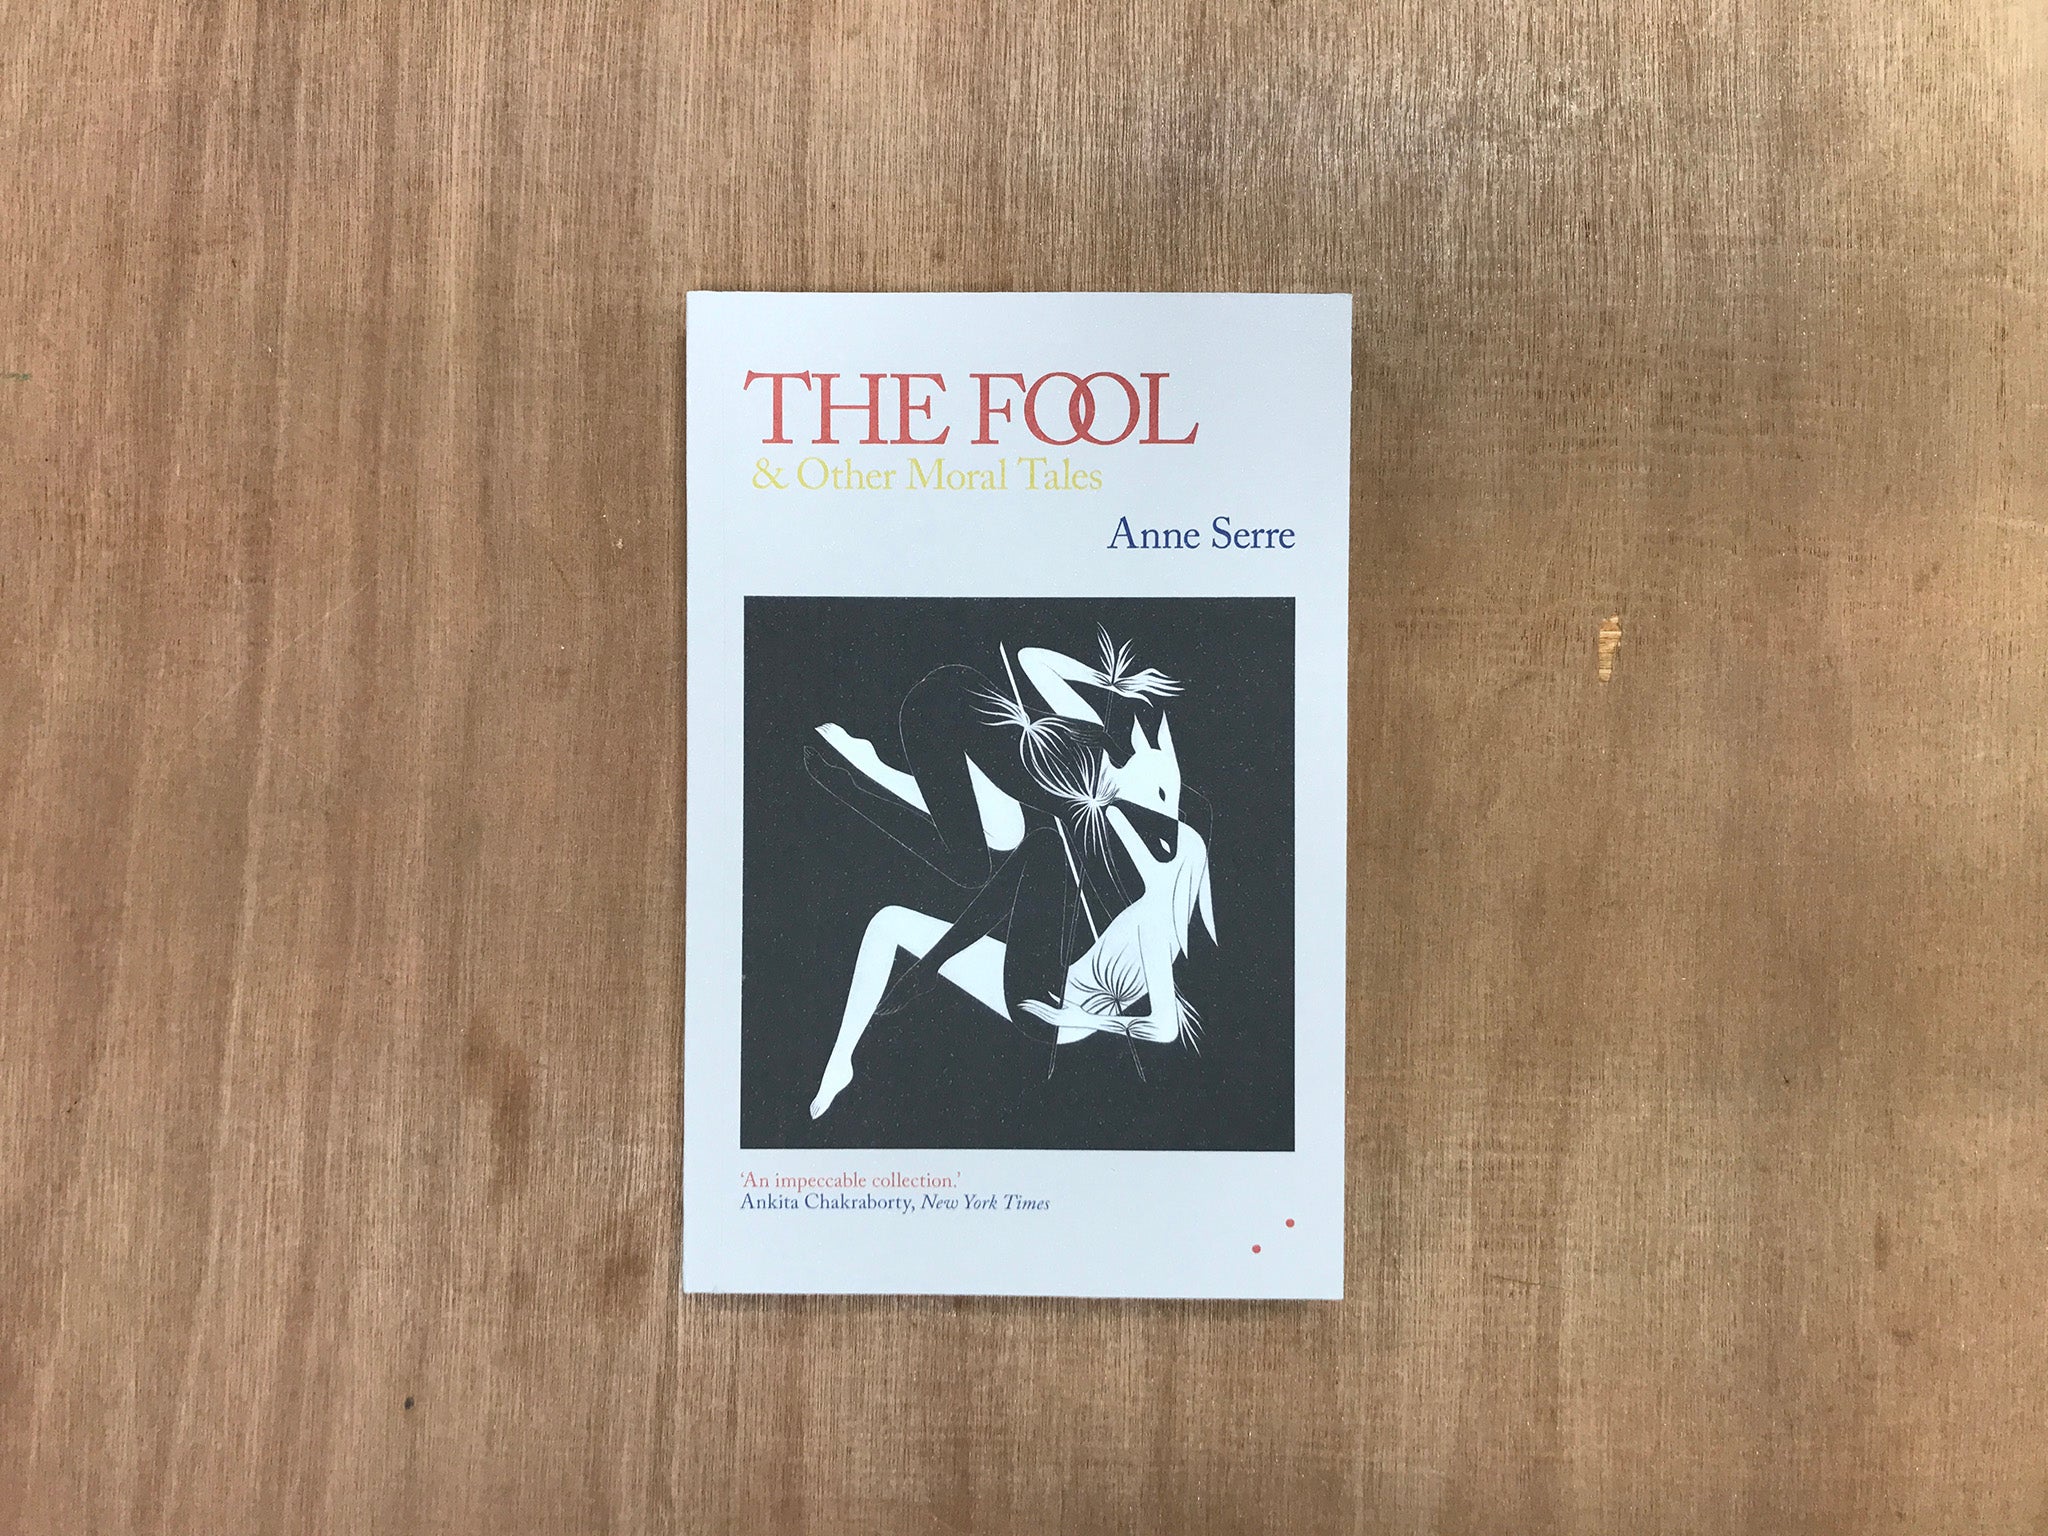 THE FOOL AND OTHER MORAL TALES by Anne Serre